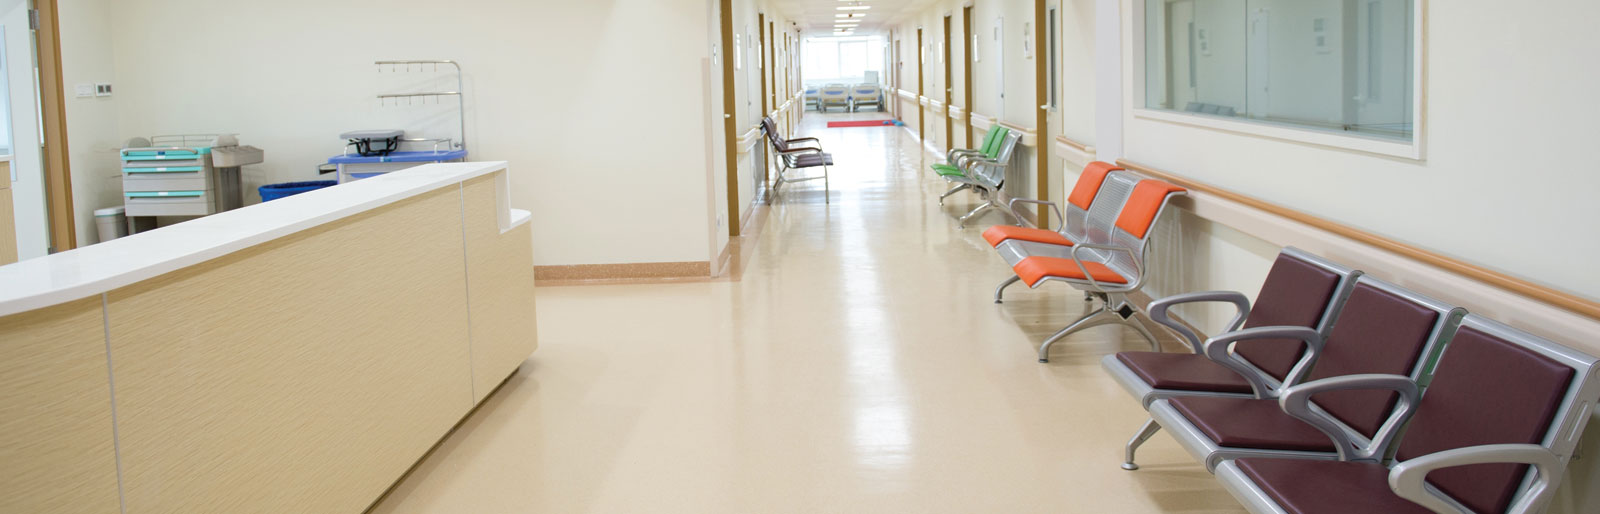 Healthcare Construction Projects